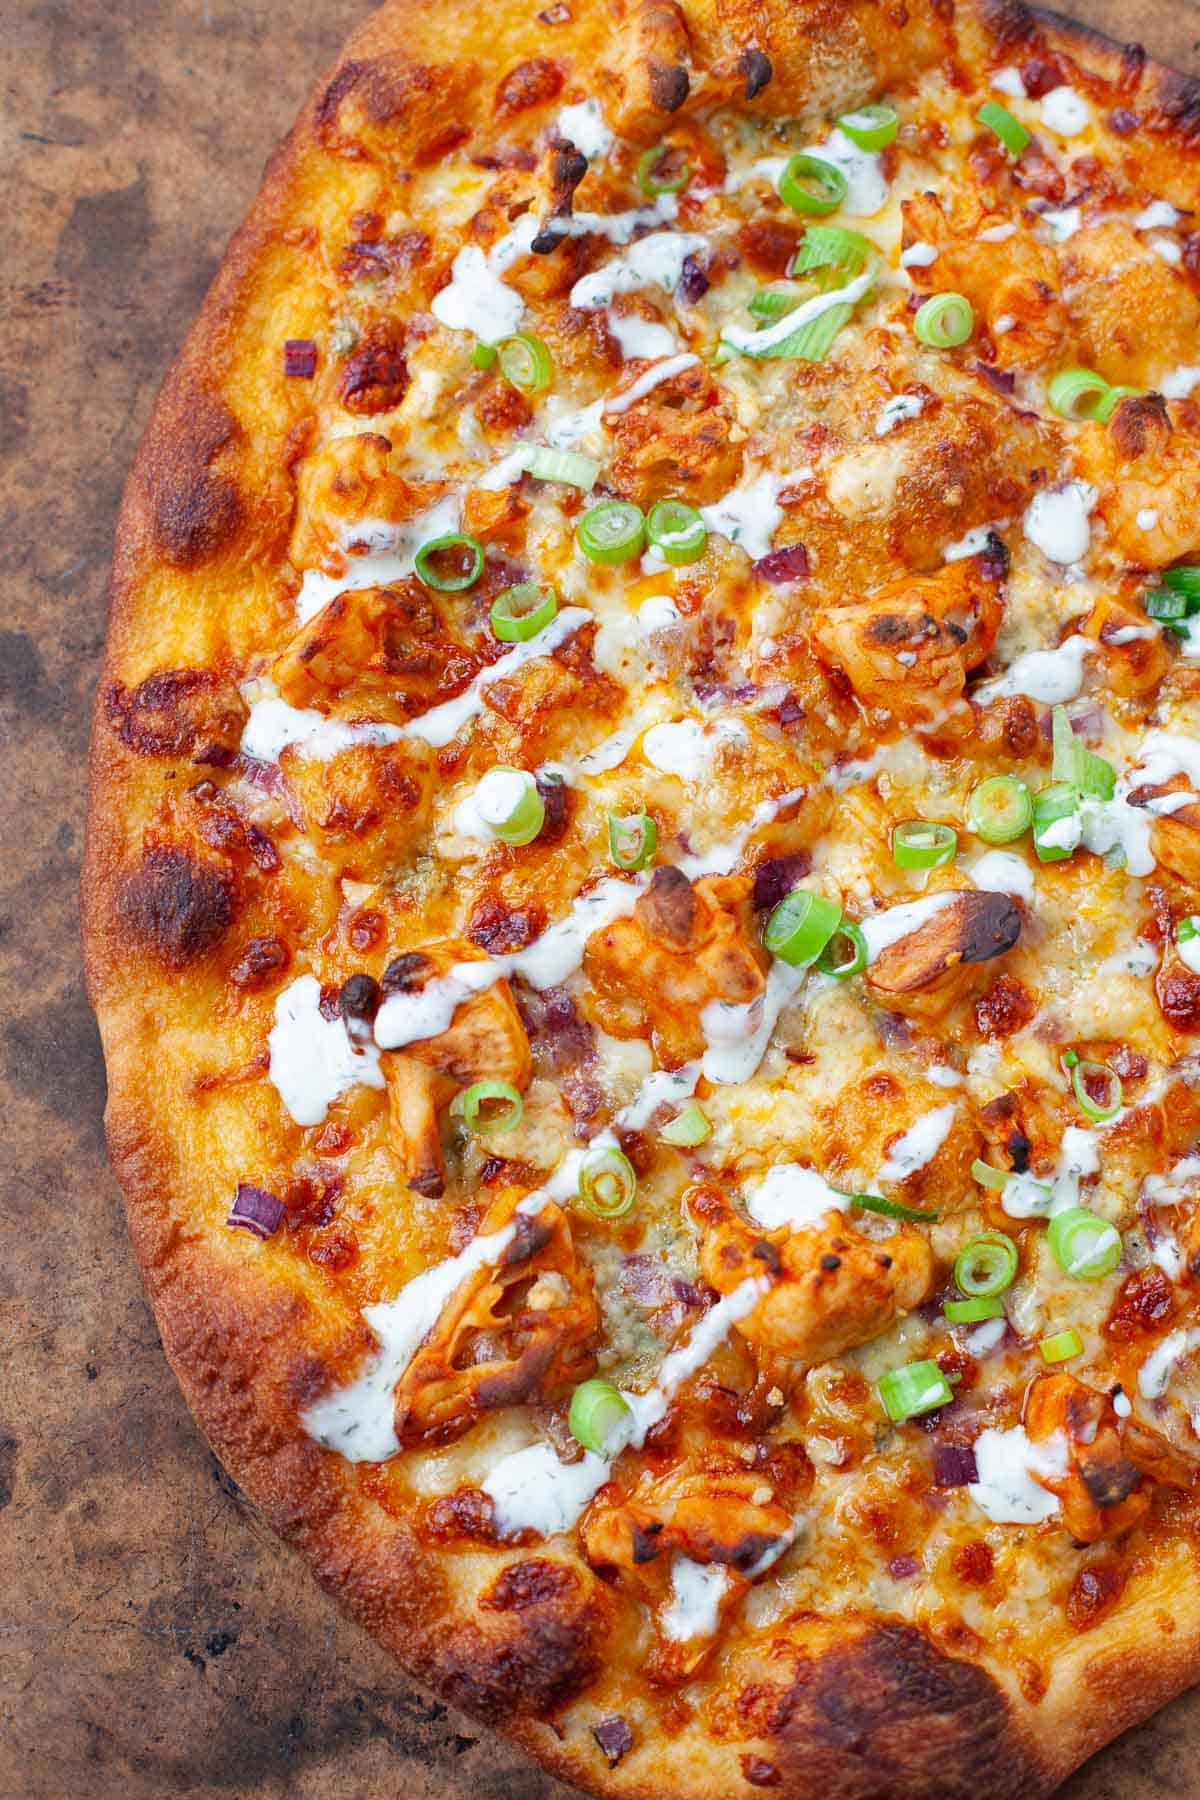 Buffalo cauliflower pizza served fresh out of the oven